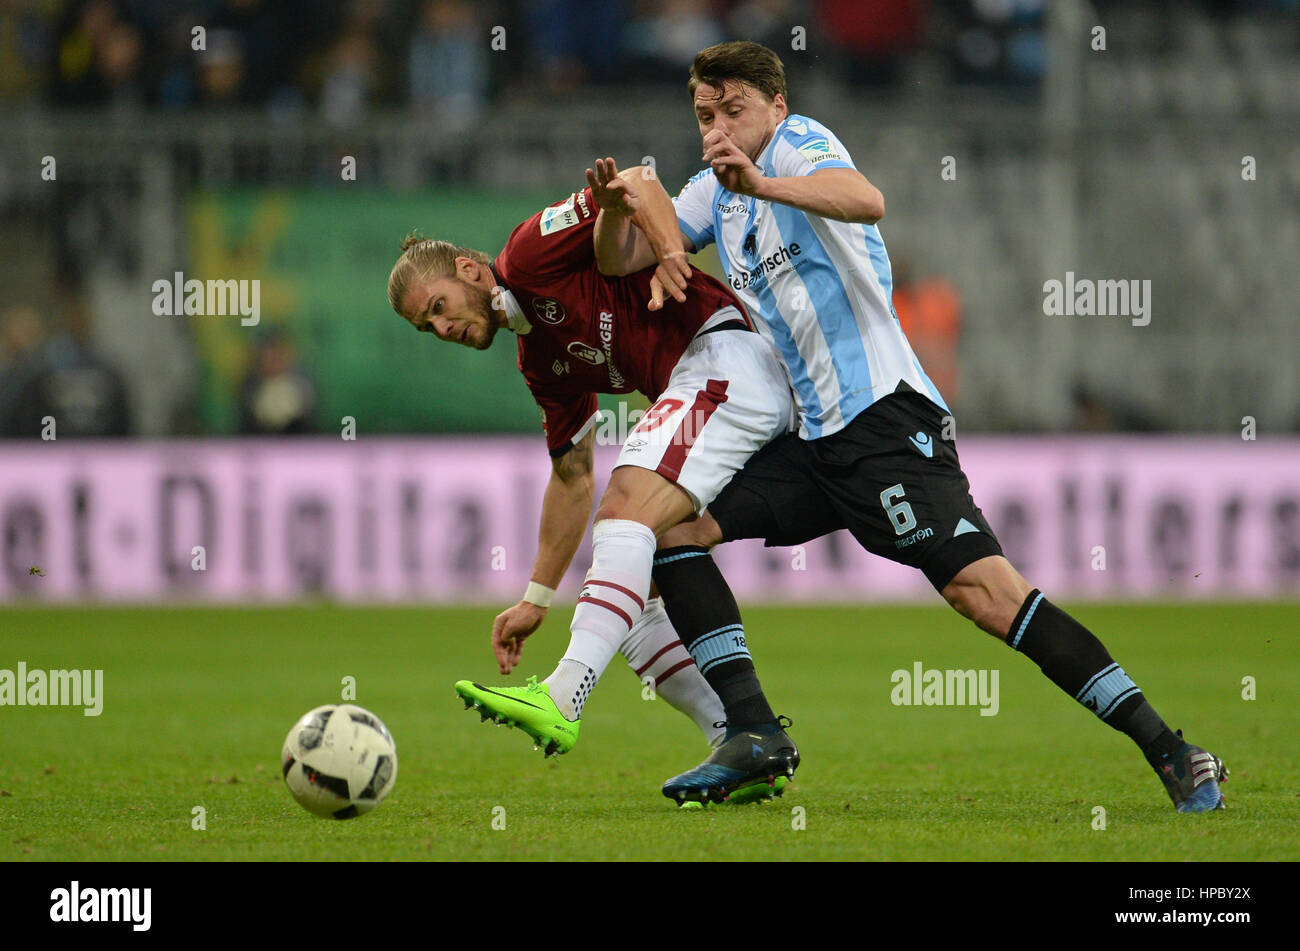 Munich's Sebastian Boenisch (r) and Nuremberg's Rurik Gislason in action during the 2nd Bundesliga soccer match between TSV 1860 Munich and 1. FC Nuremberg at the Allianz Arena in Munich, Germany, 20 February 2017.    (EMBARGO CONDITIONS - ATTENTION: Due to the accreditation guidlines, the DFL only permits the publication and utilisation of up to 15 pictures per match on the internet and in online media during the match.) Photo: Andreas Gebert/dpa Stock Photo